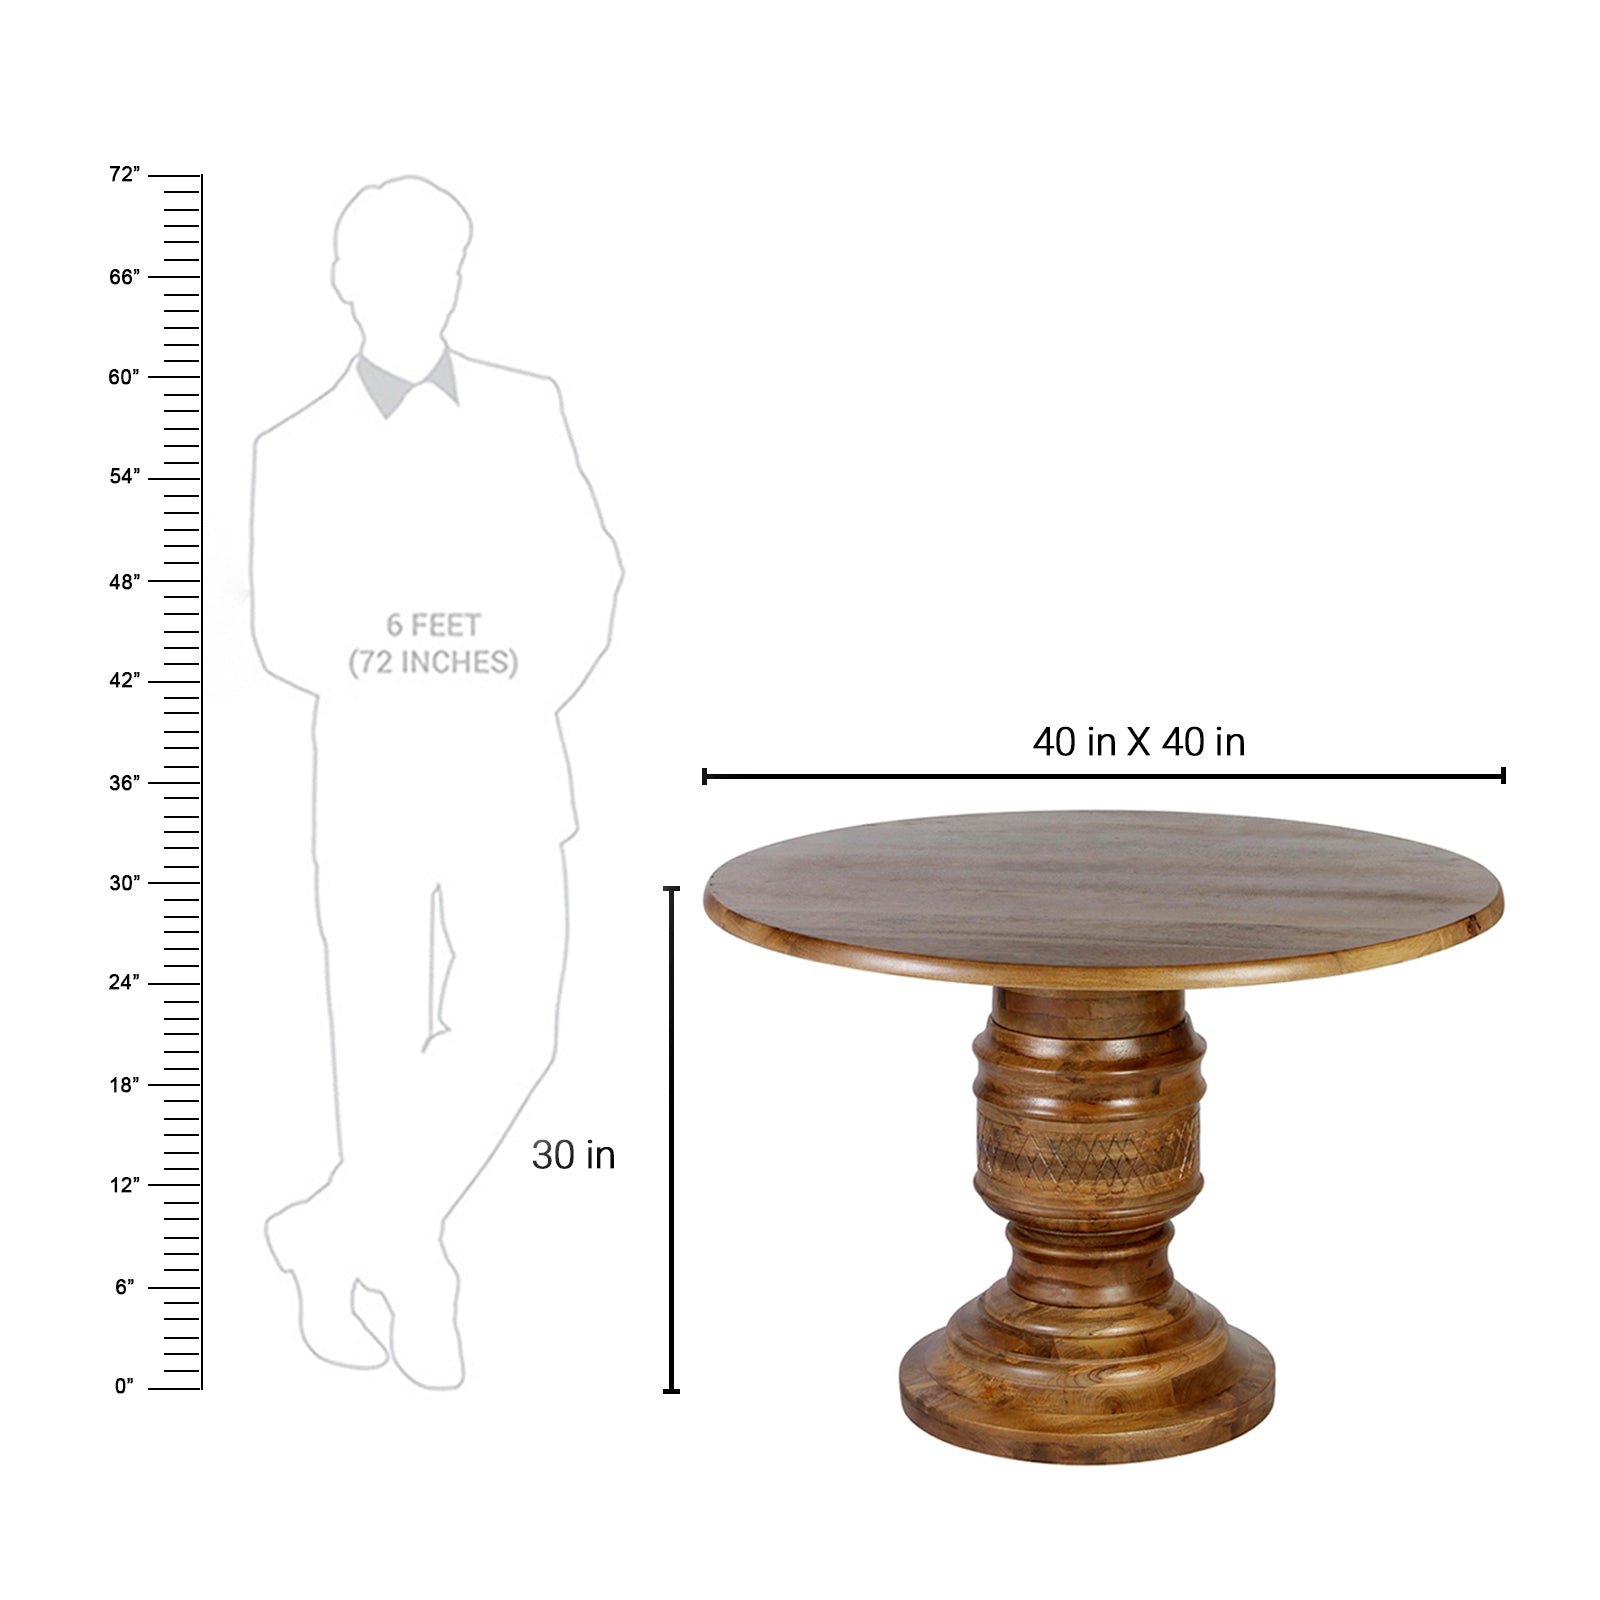 Garance New Solid Wood Round Dining Table